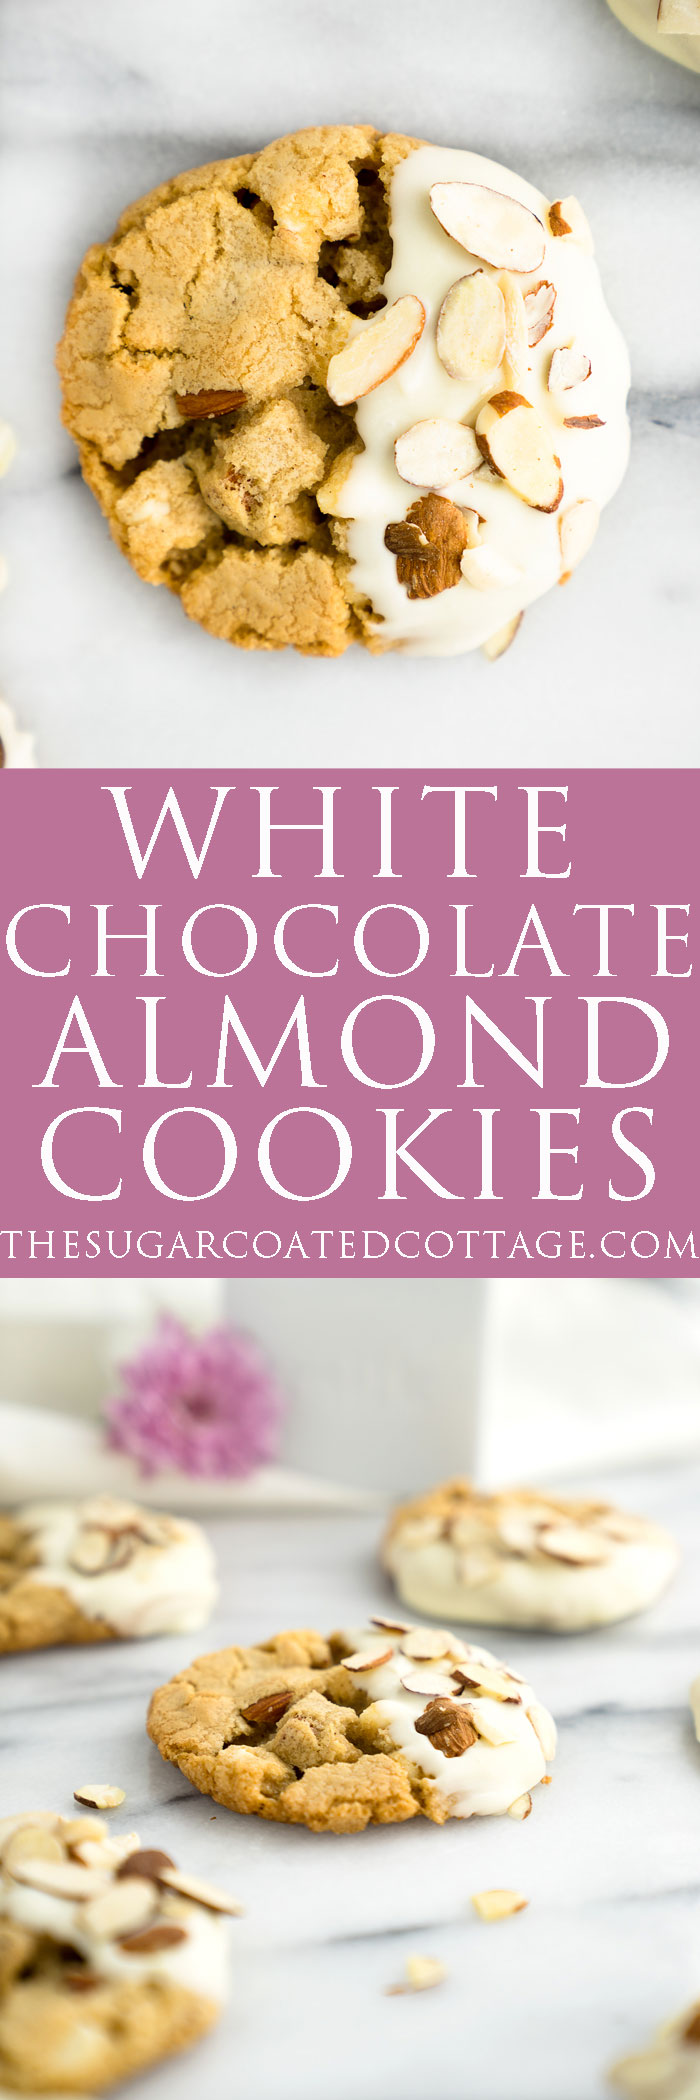 White Chocolate Roasted Almond Cookie Recipe. Crispy, crinkly, buttery cookies studded with crunchy roasted almonds and creamy white chocolate chips. | thesugarcoatedcottage.com